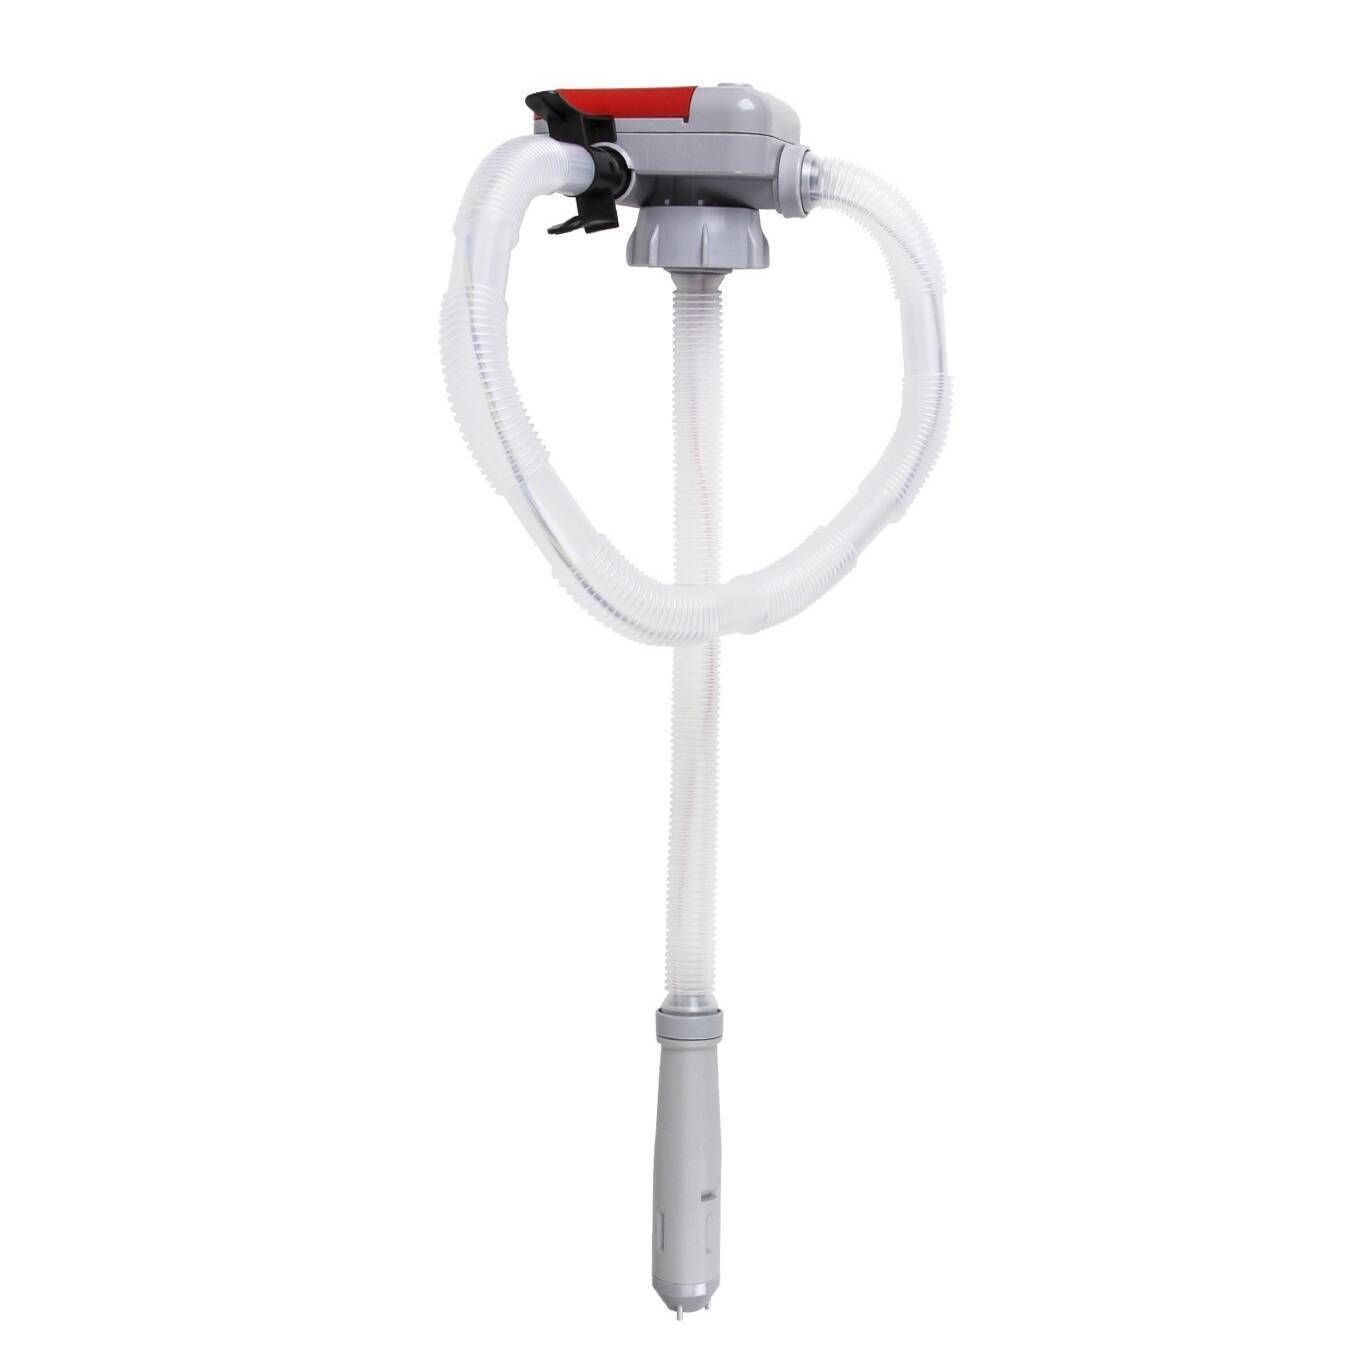 TERA PUMP Gas Can Adapater Bundle for Battery Powered Fuel Transfer Pump w/Flexible Intake hose 